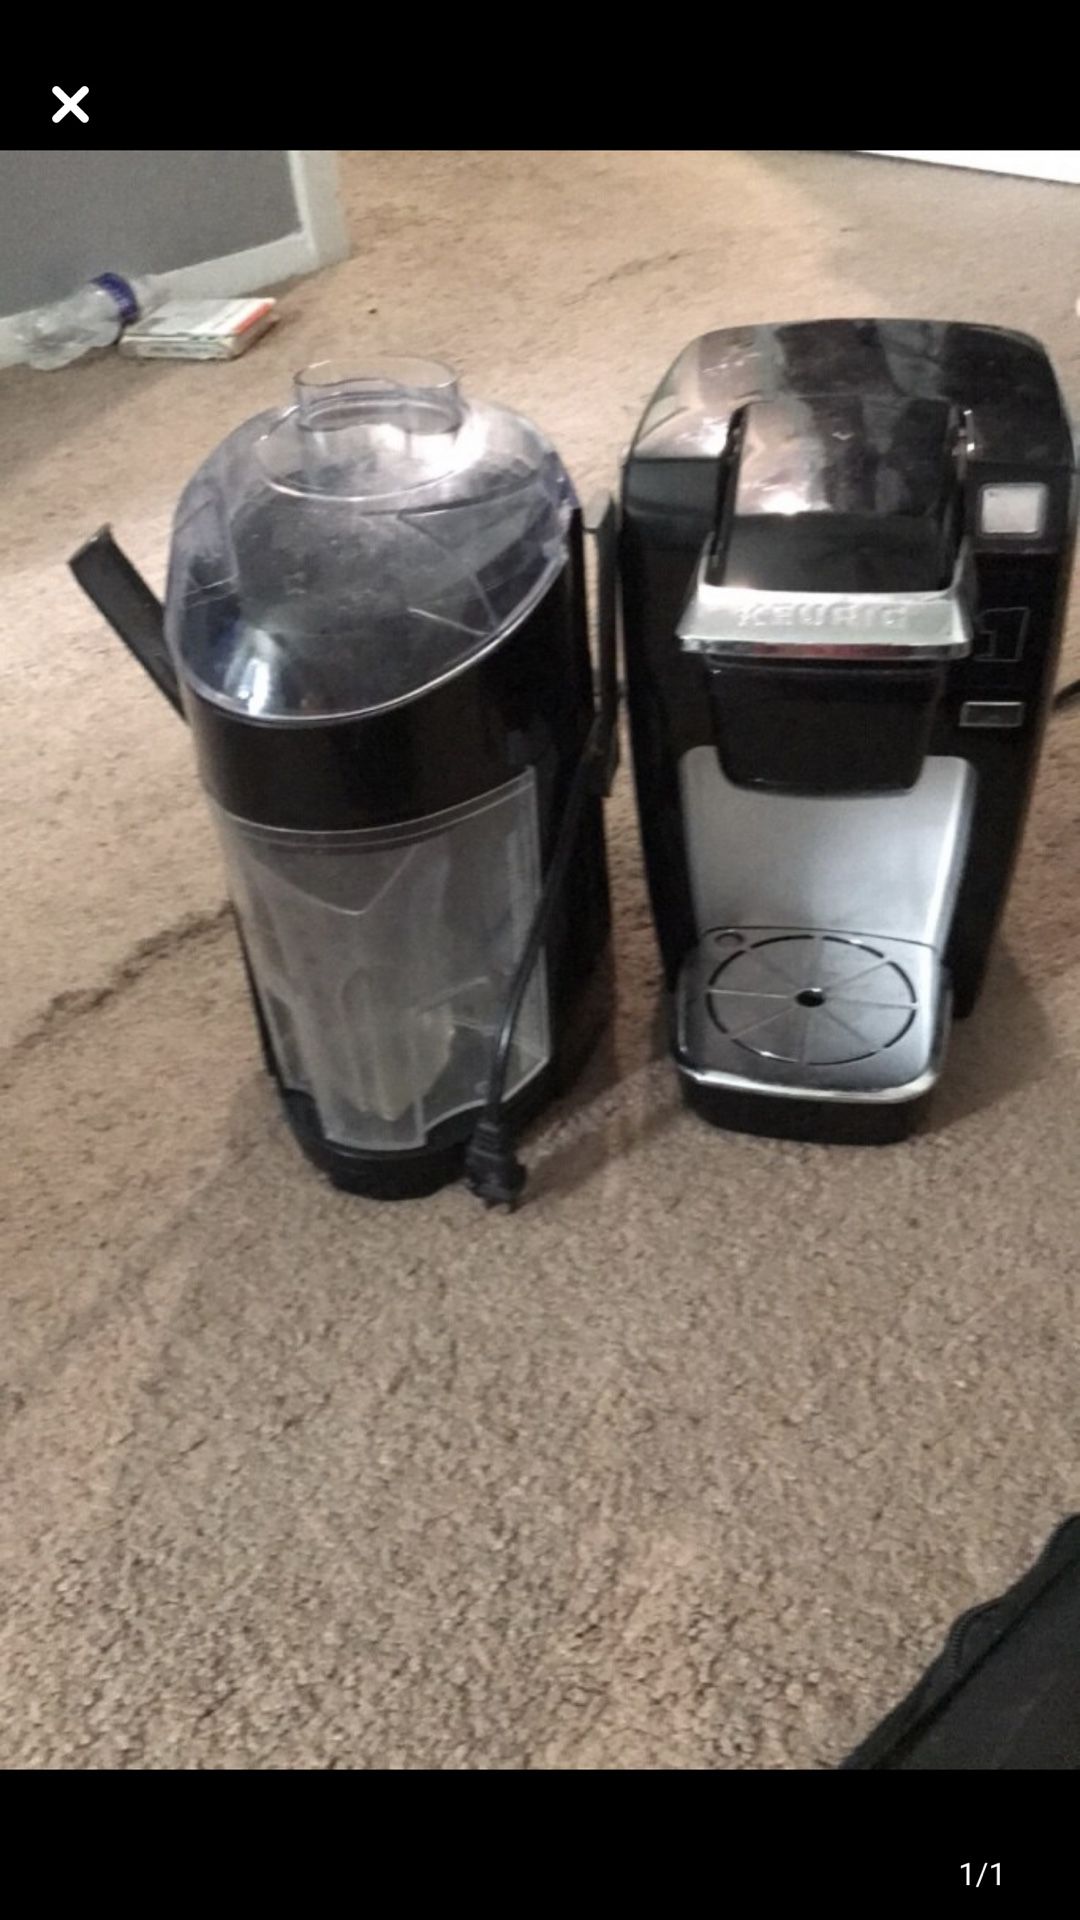 Coffee maker and juice maker